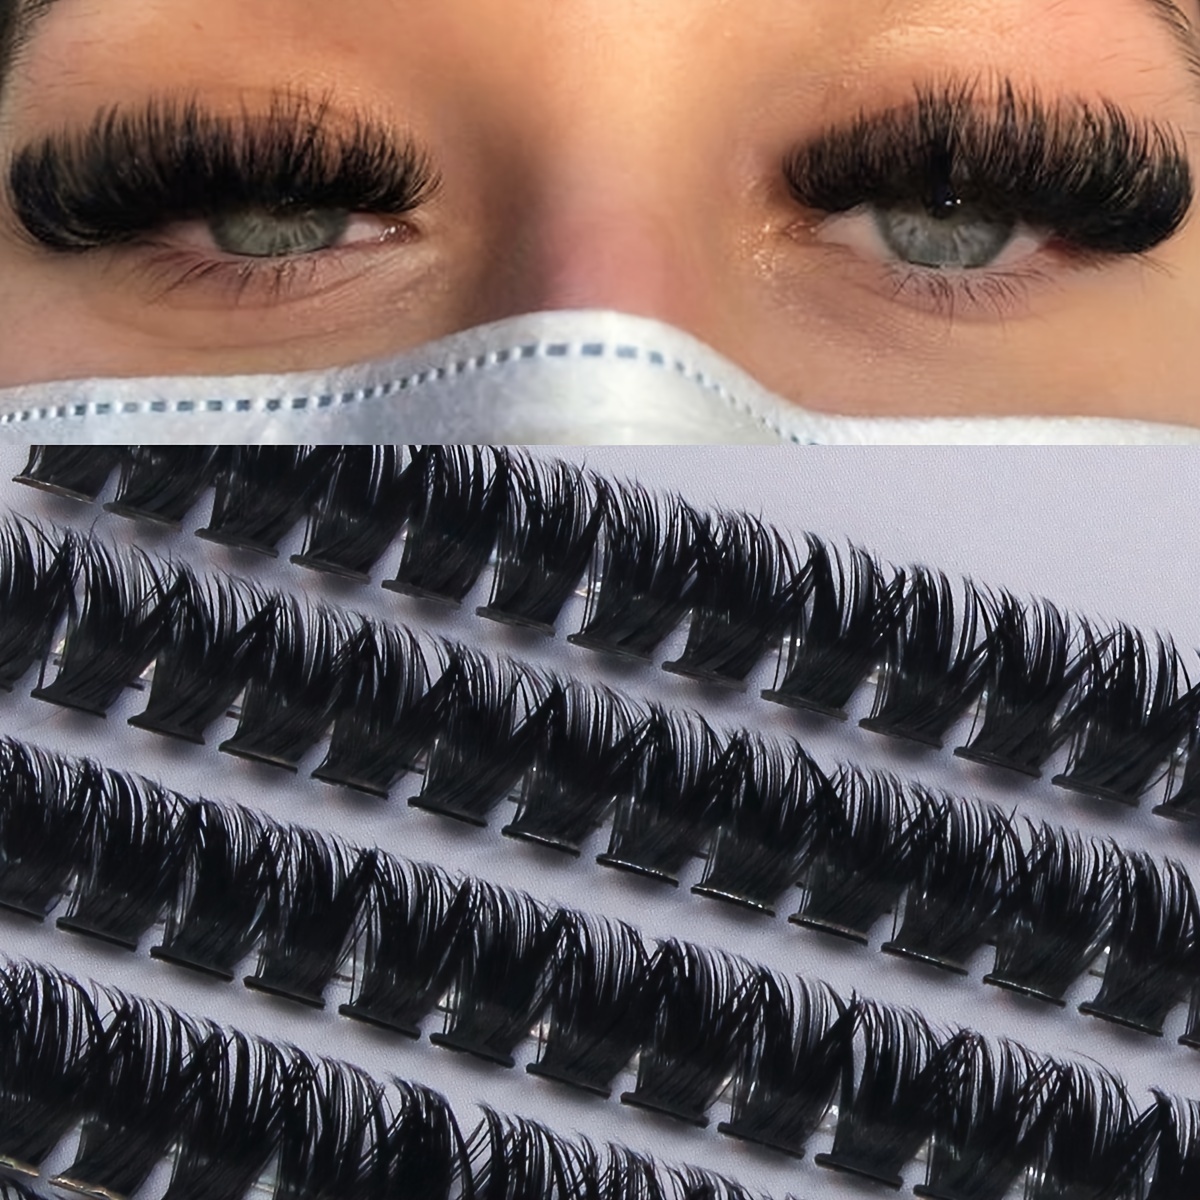 

280pcs Faux Mink Eyelash Extensions, Diy 100d Clusters, 0.07mm Thick, D , Fluffy Dramatic Look, Mixed Length 9-16mm, Reusable Volume Lash Packs